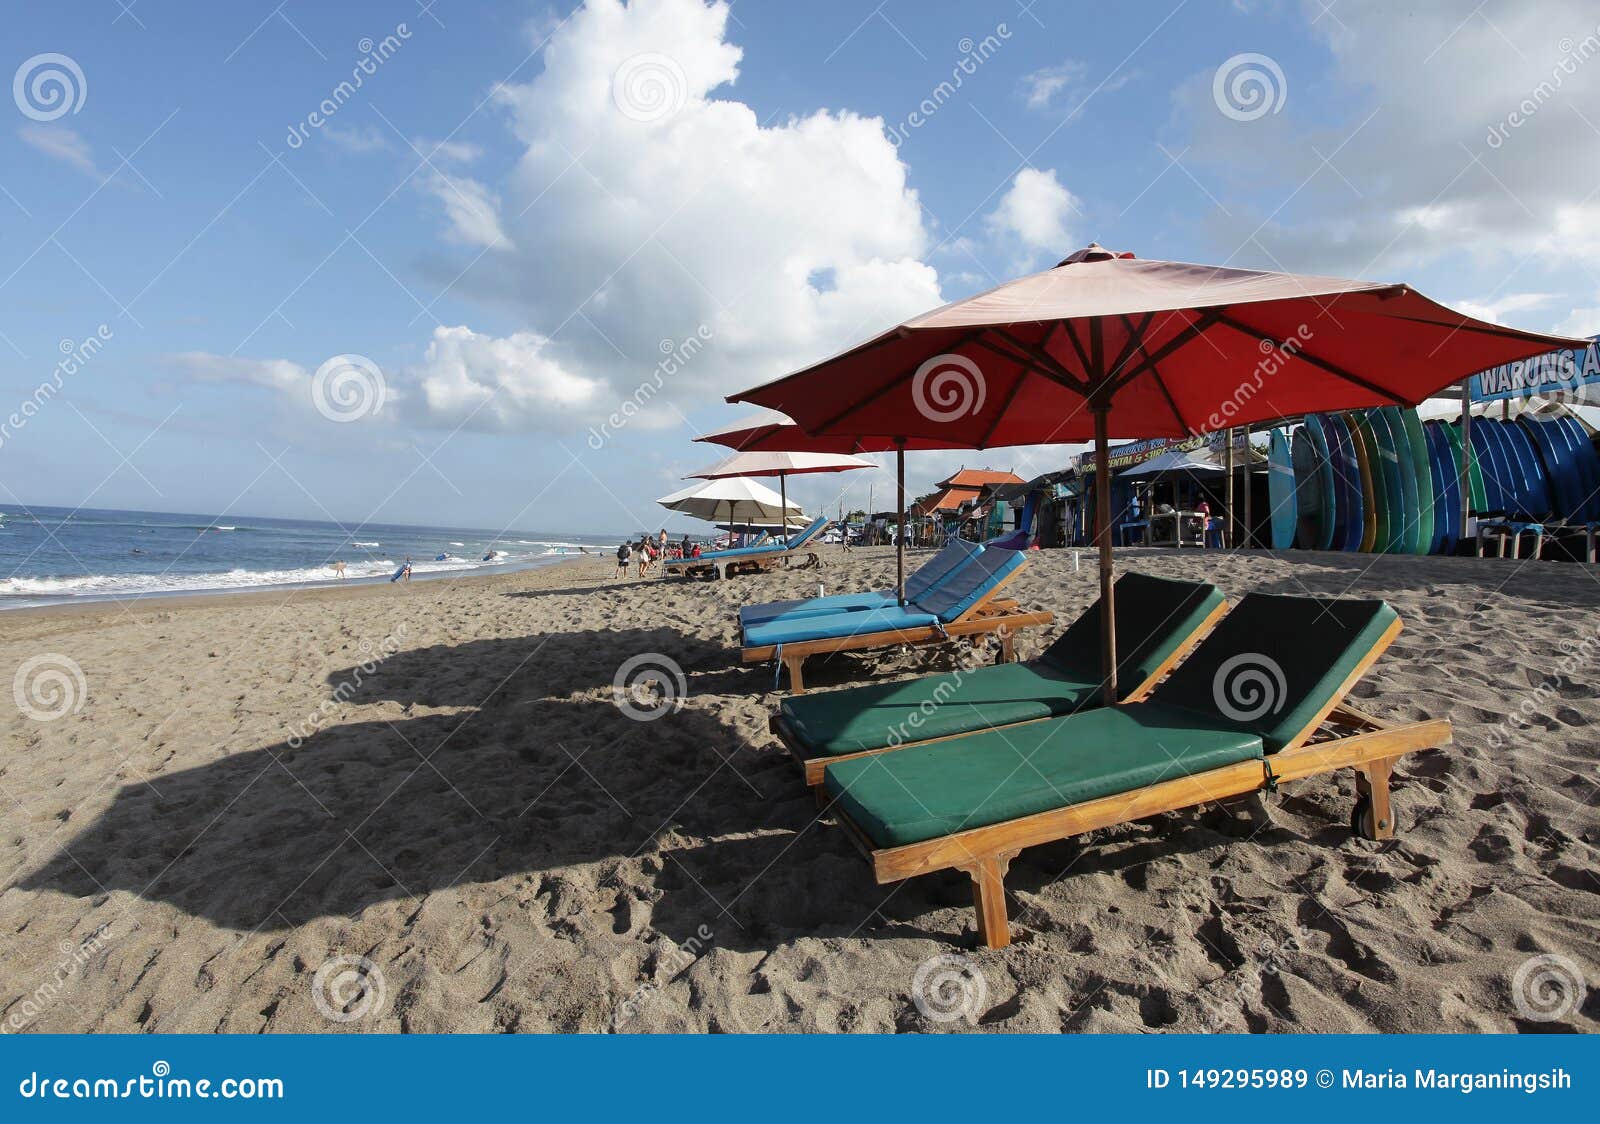 Canggu, Indonesia - May 27, 2019: Surfer Beach and Local Shops of Surf